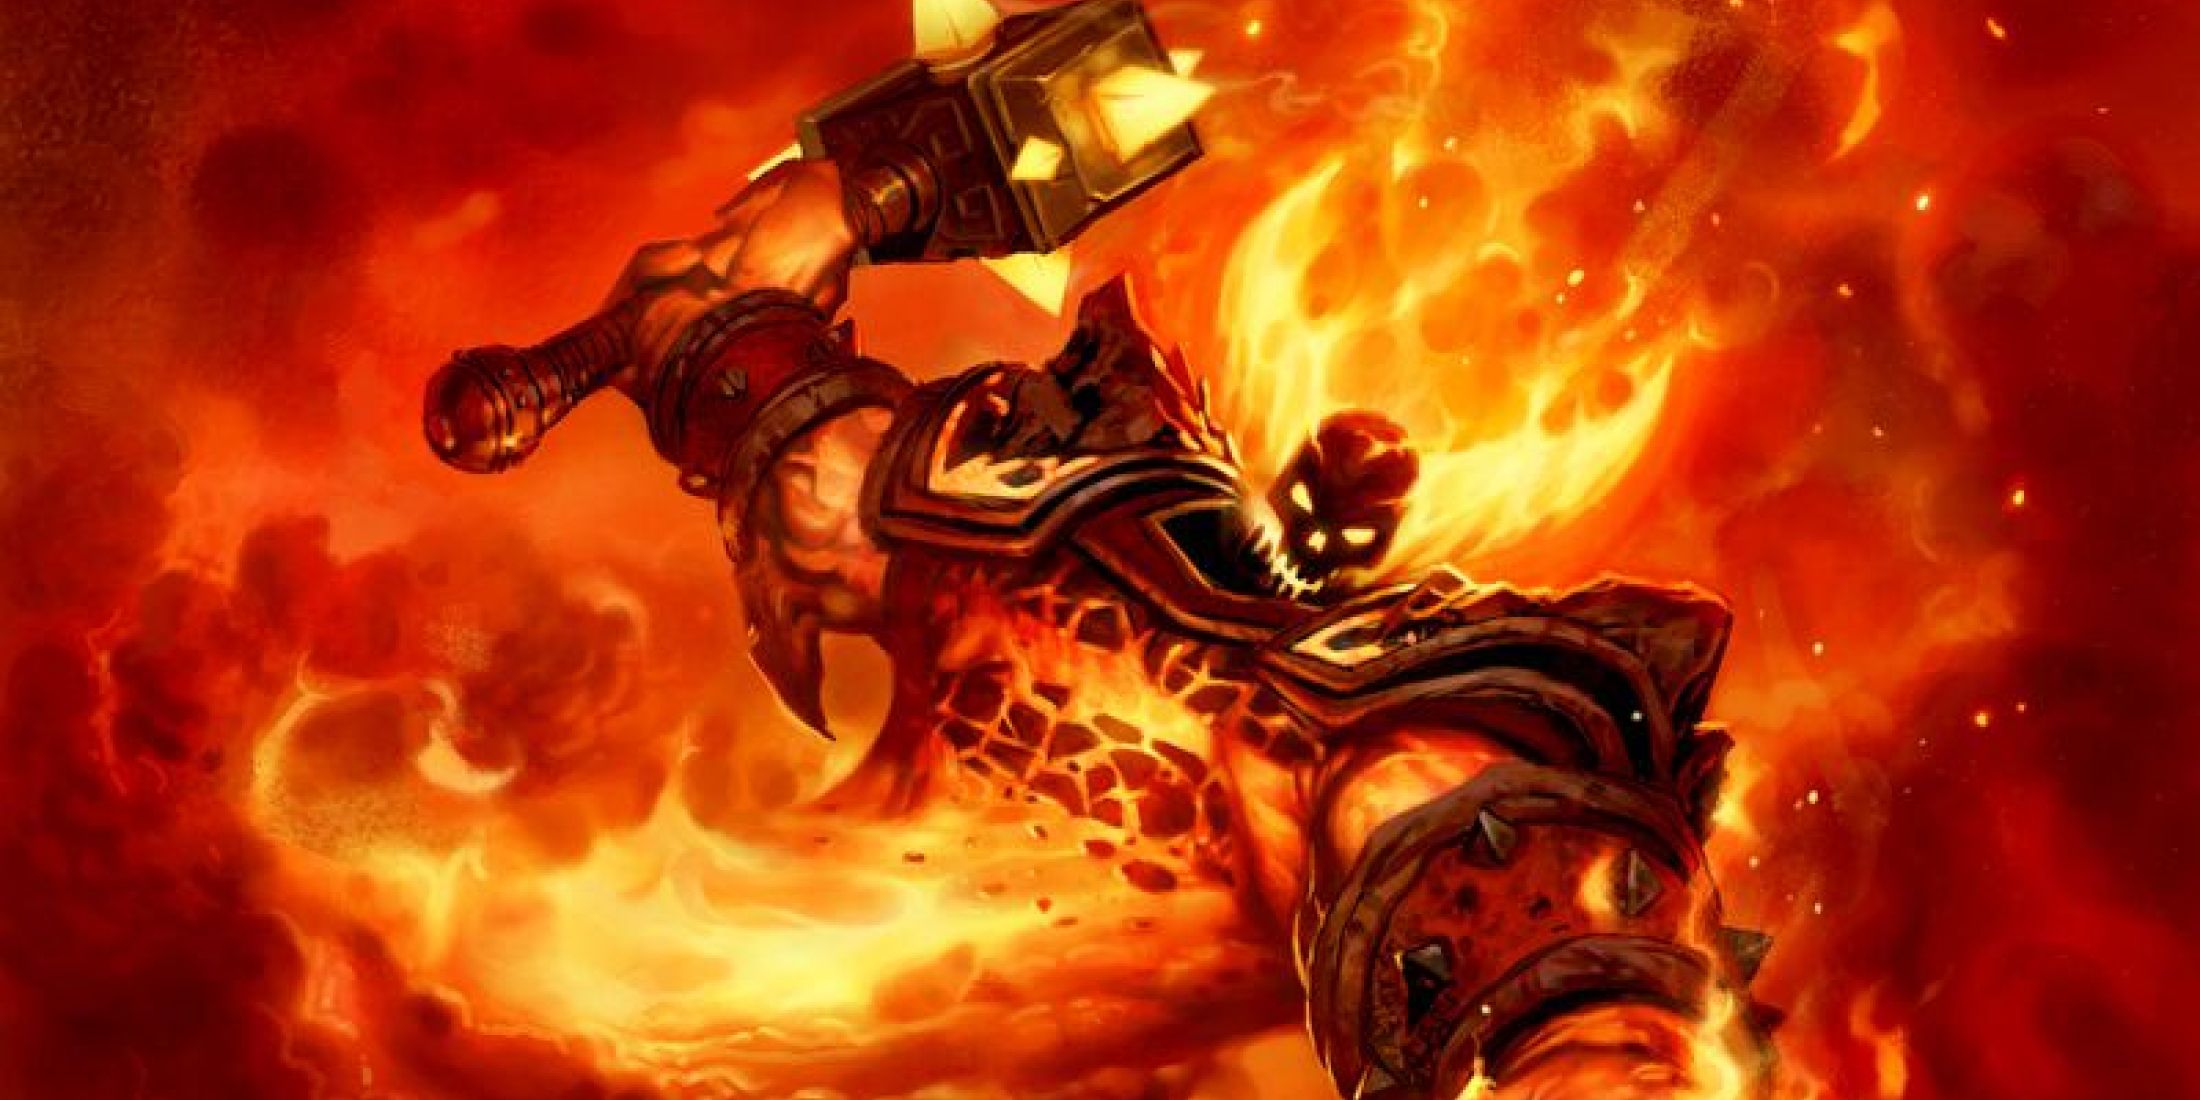 ragnaros the firelord from wow trading card game hearthstone